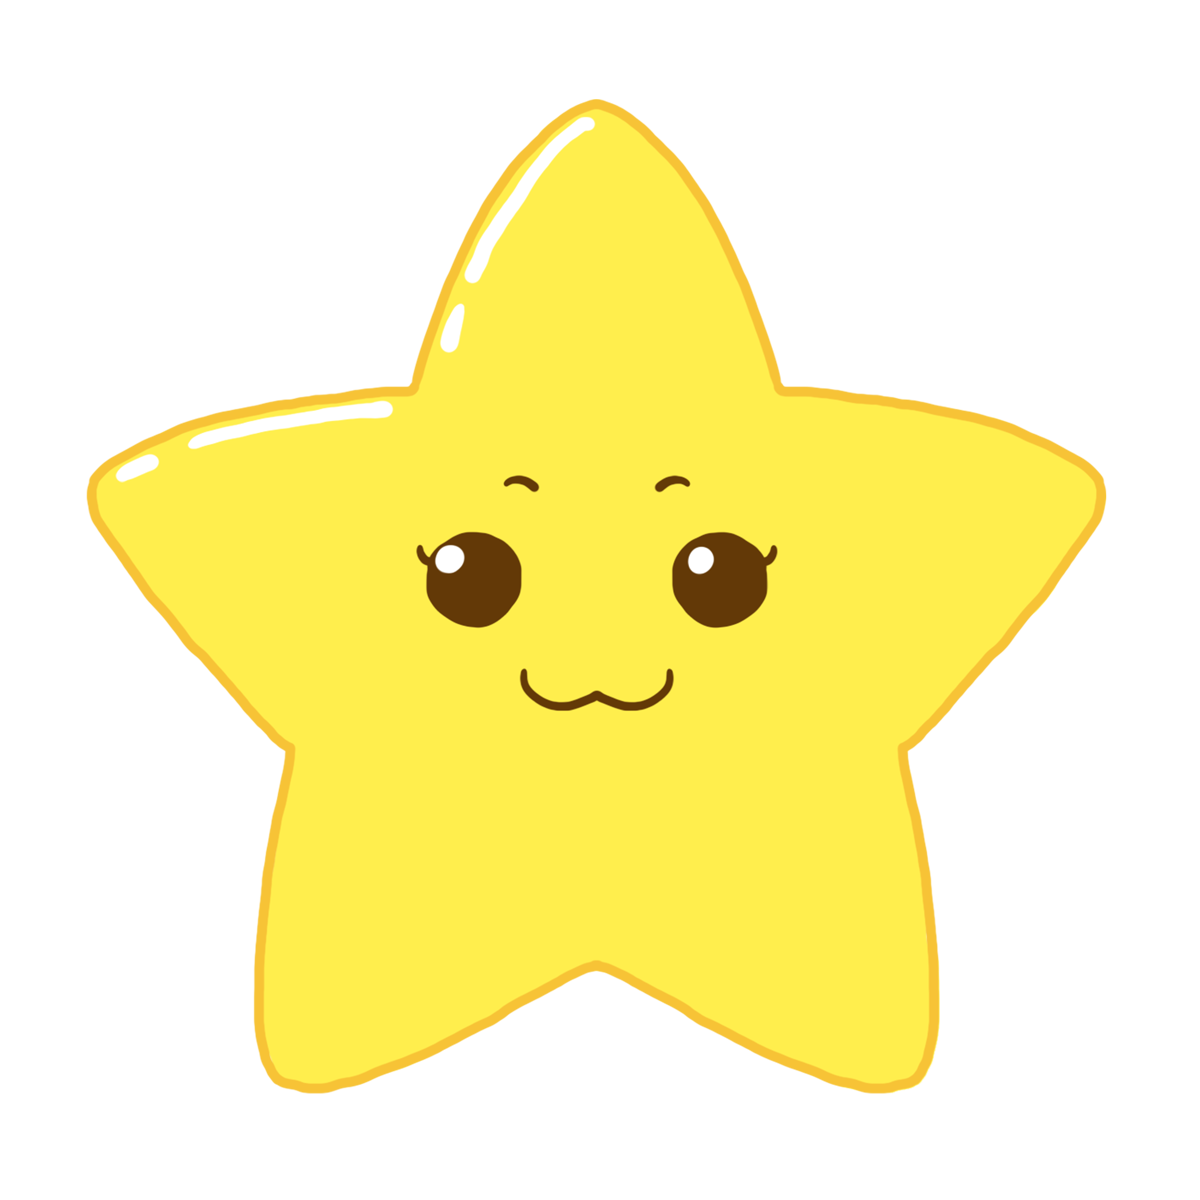 —Pngtree—bright cute stars expressions_6316730